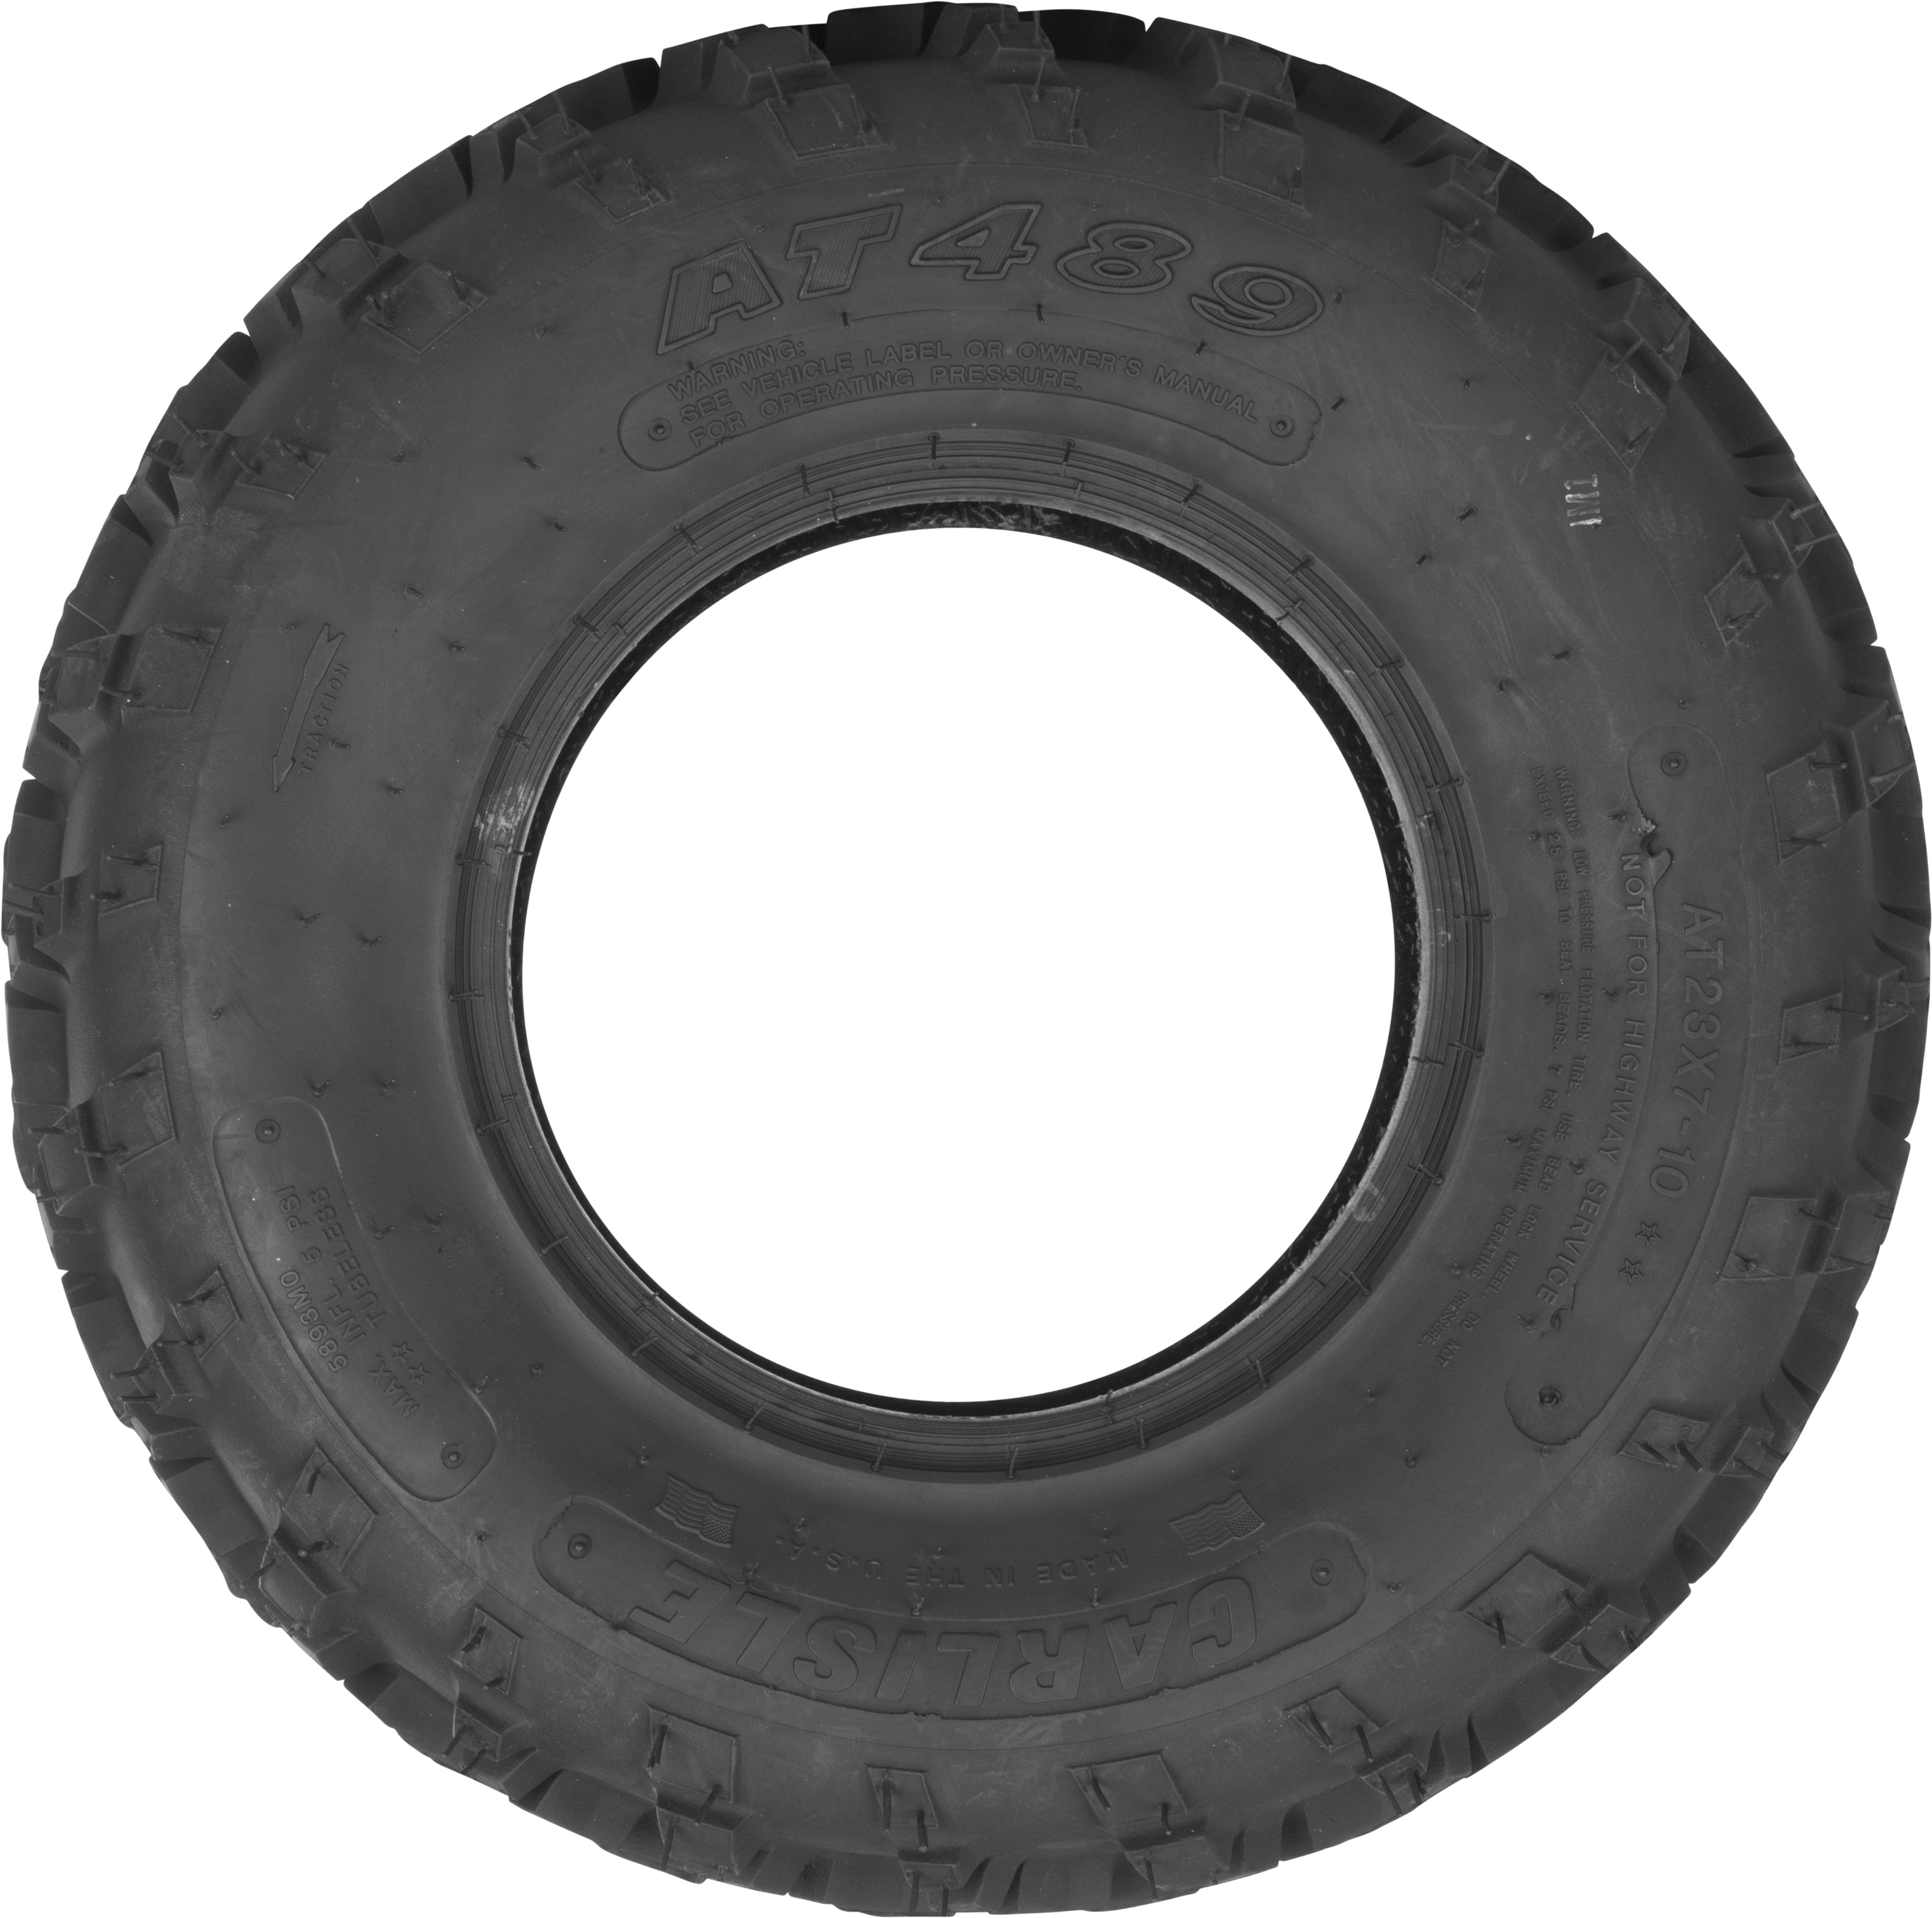 Tire At489 Front 23x7 10 Bias